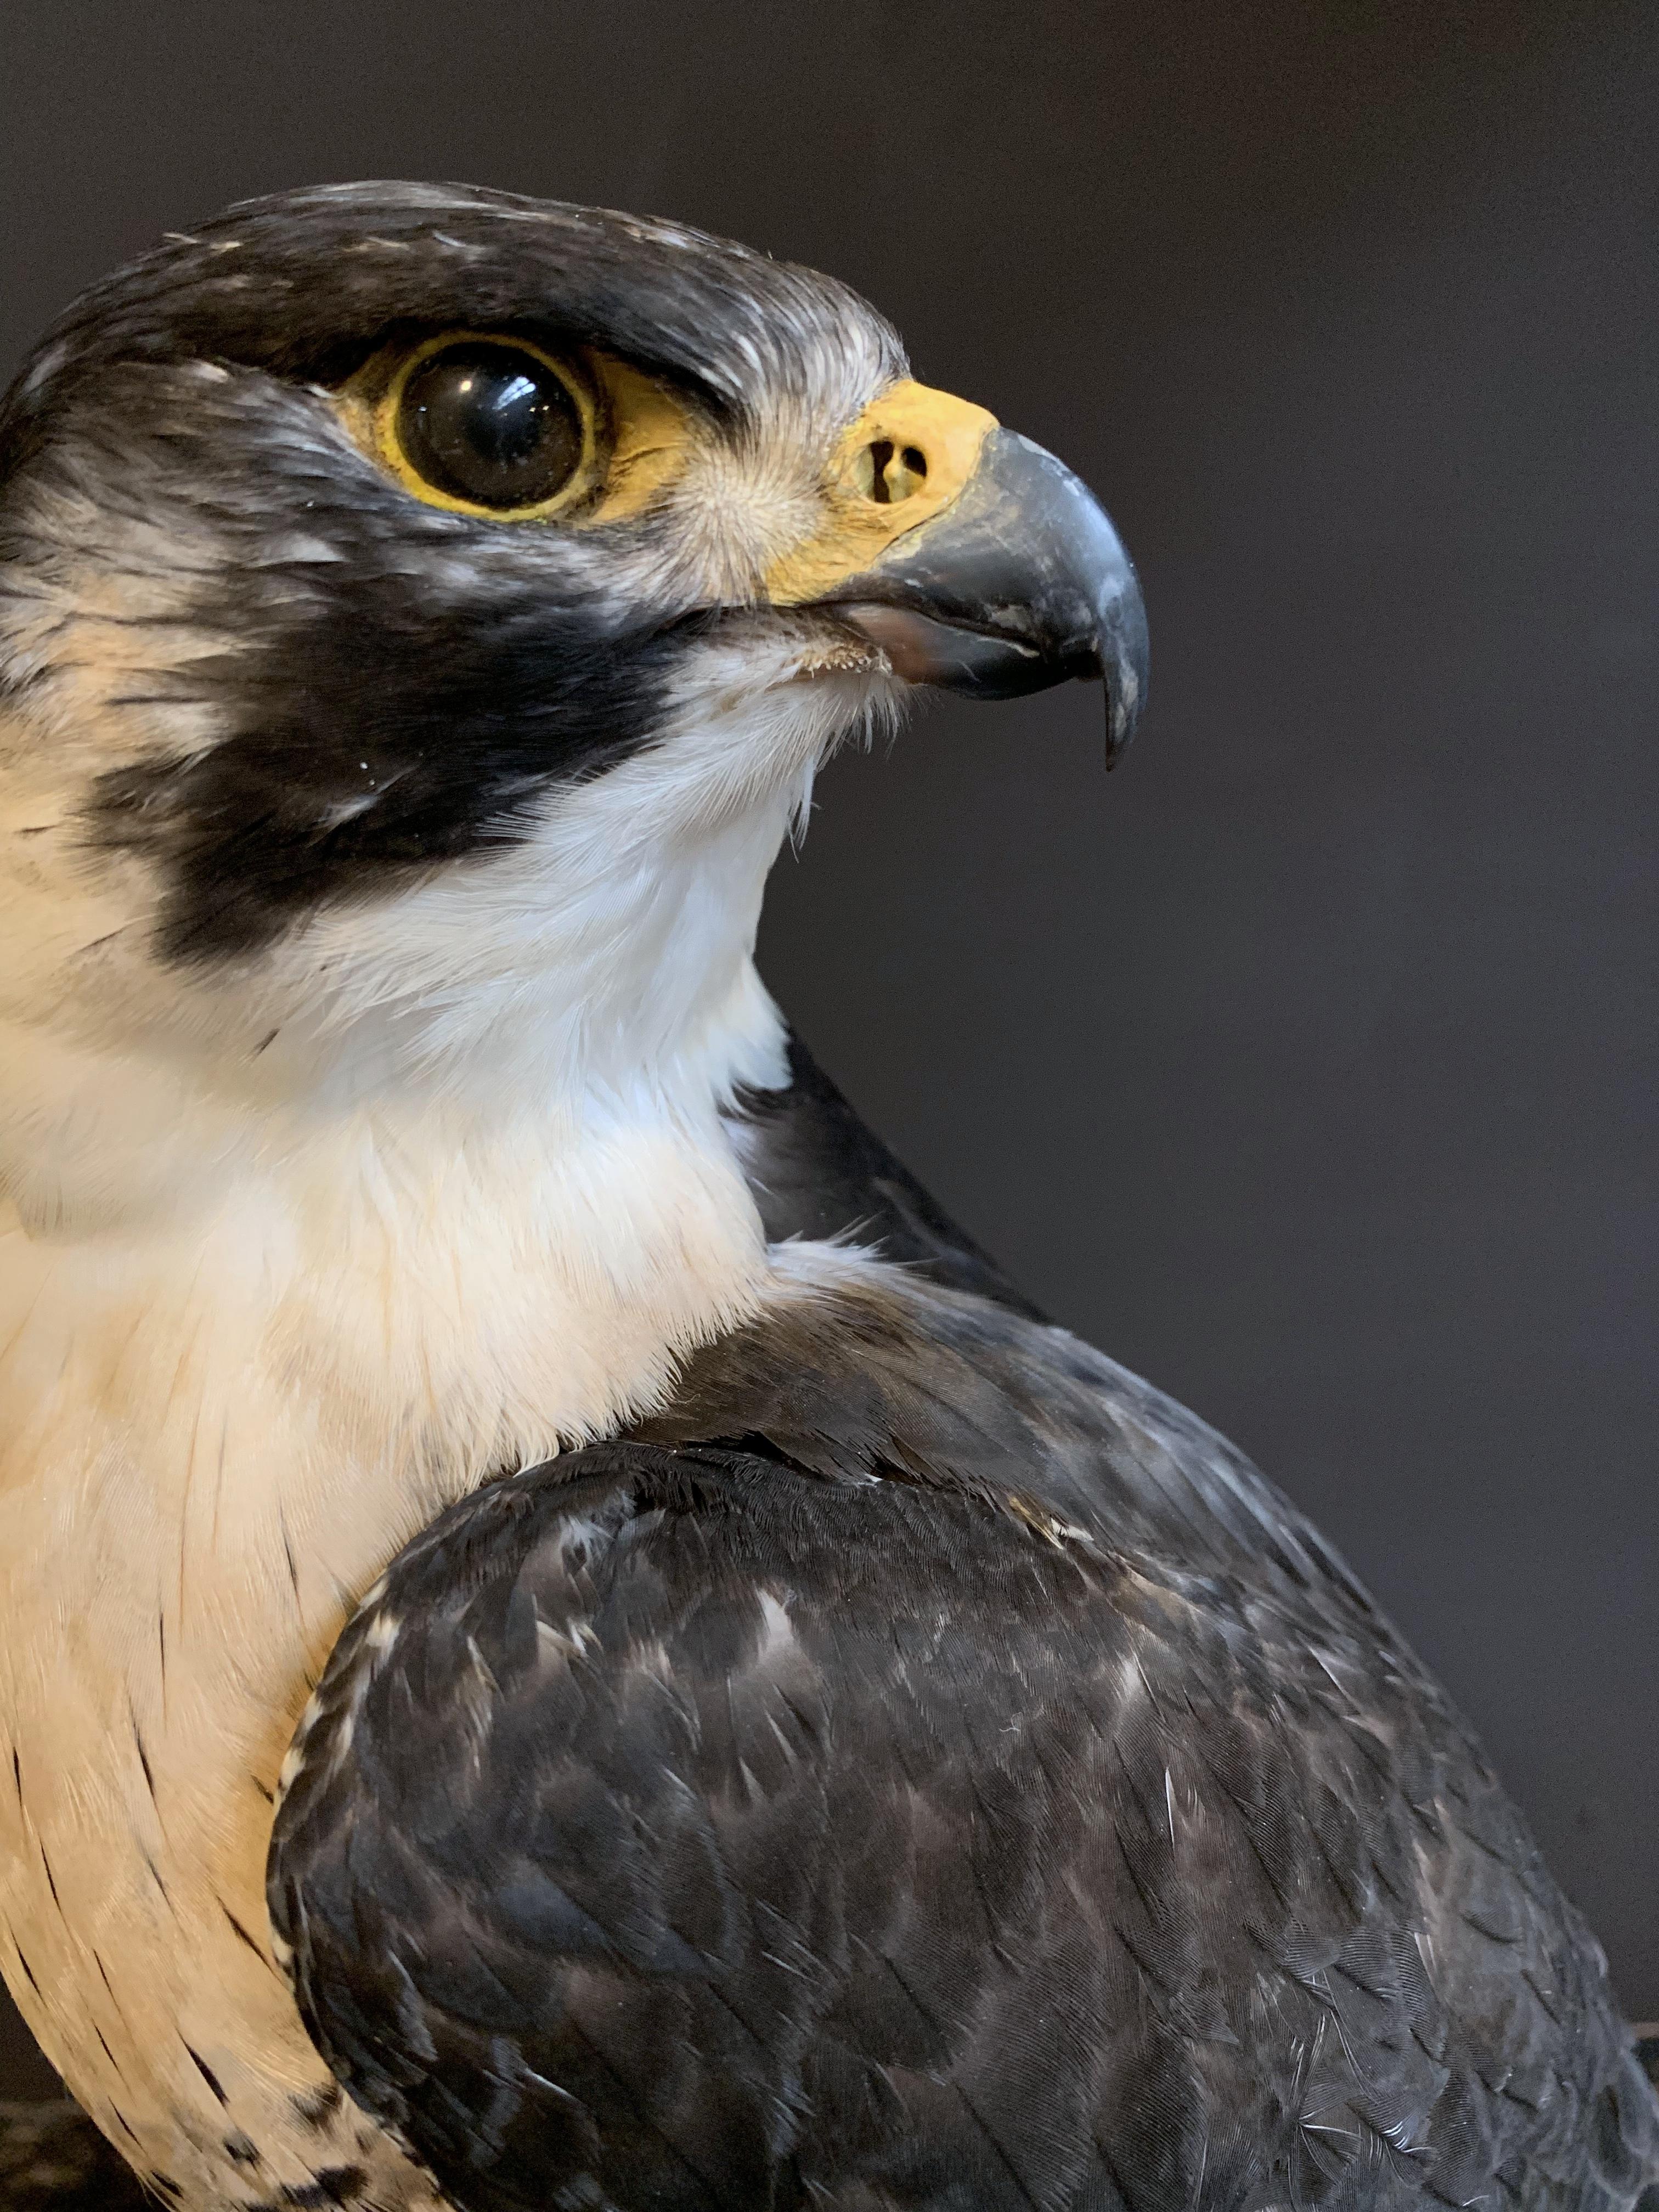 German Recently Made Taxidermy Peregrine Falcon with Grouse as Prey